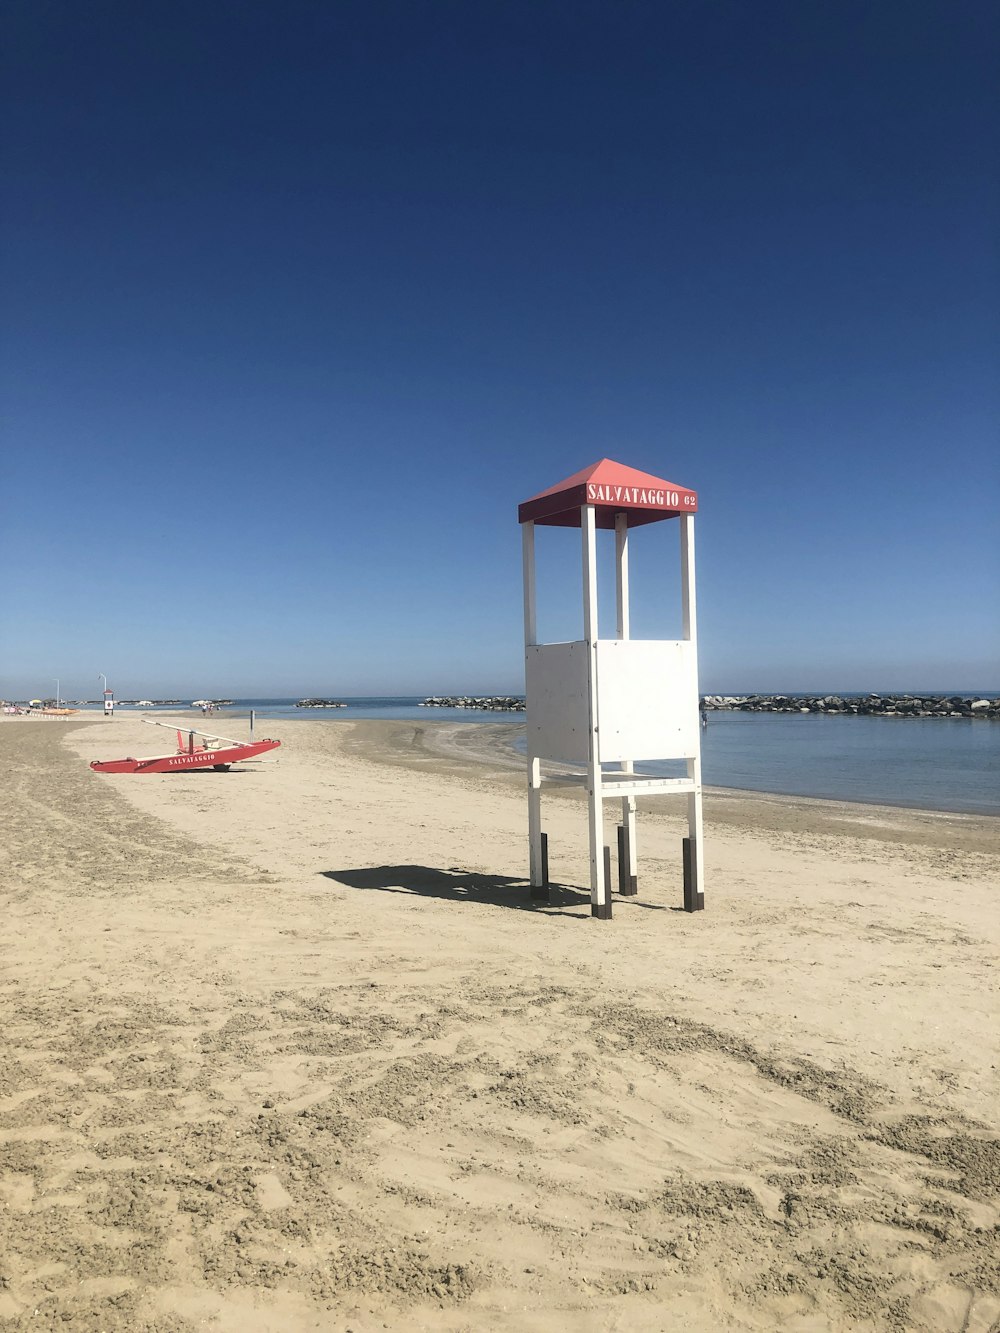 white and red lifeguard tower on beach shore during daytime